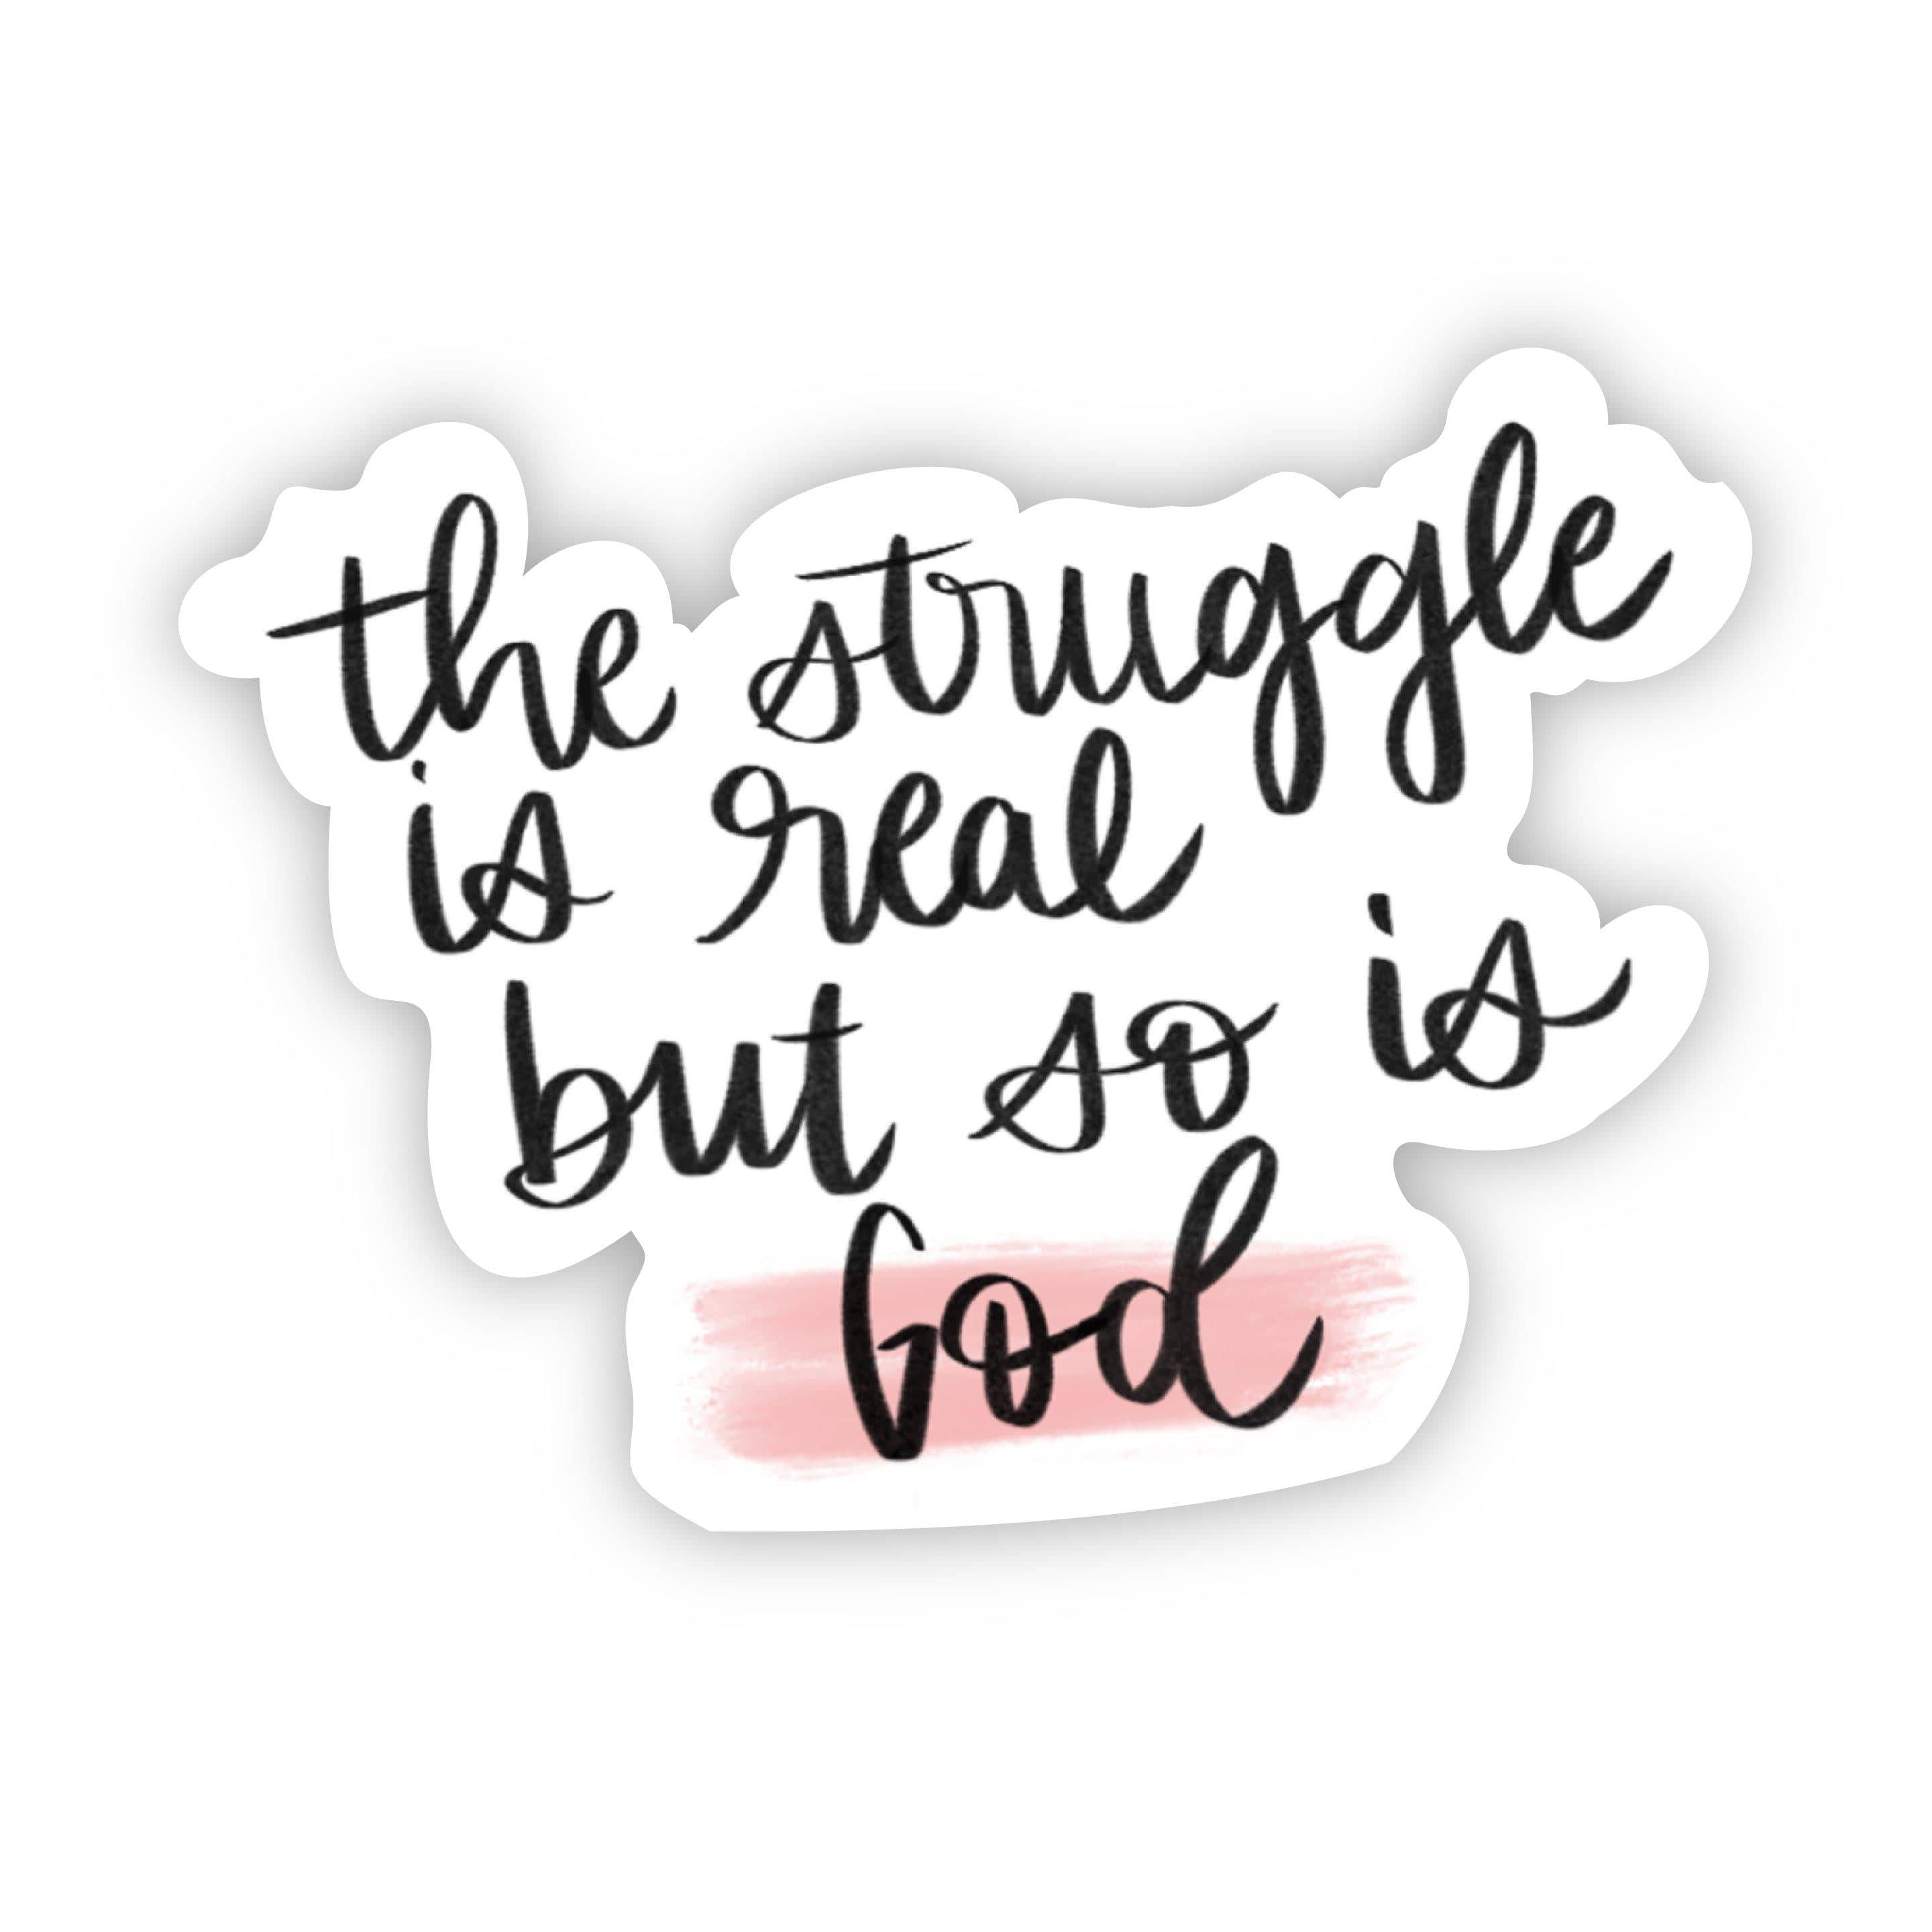 The Struggle Is Real. But So Is God - Lettering Faith Sticker